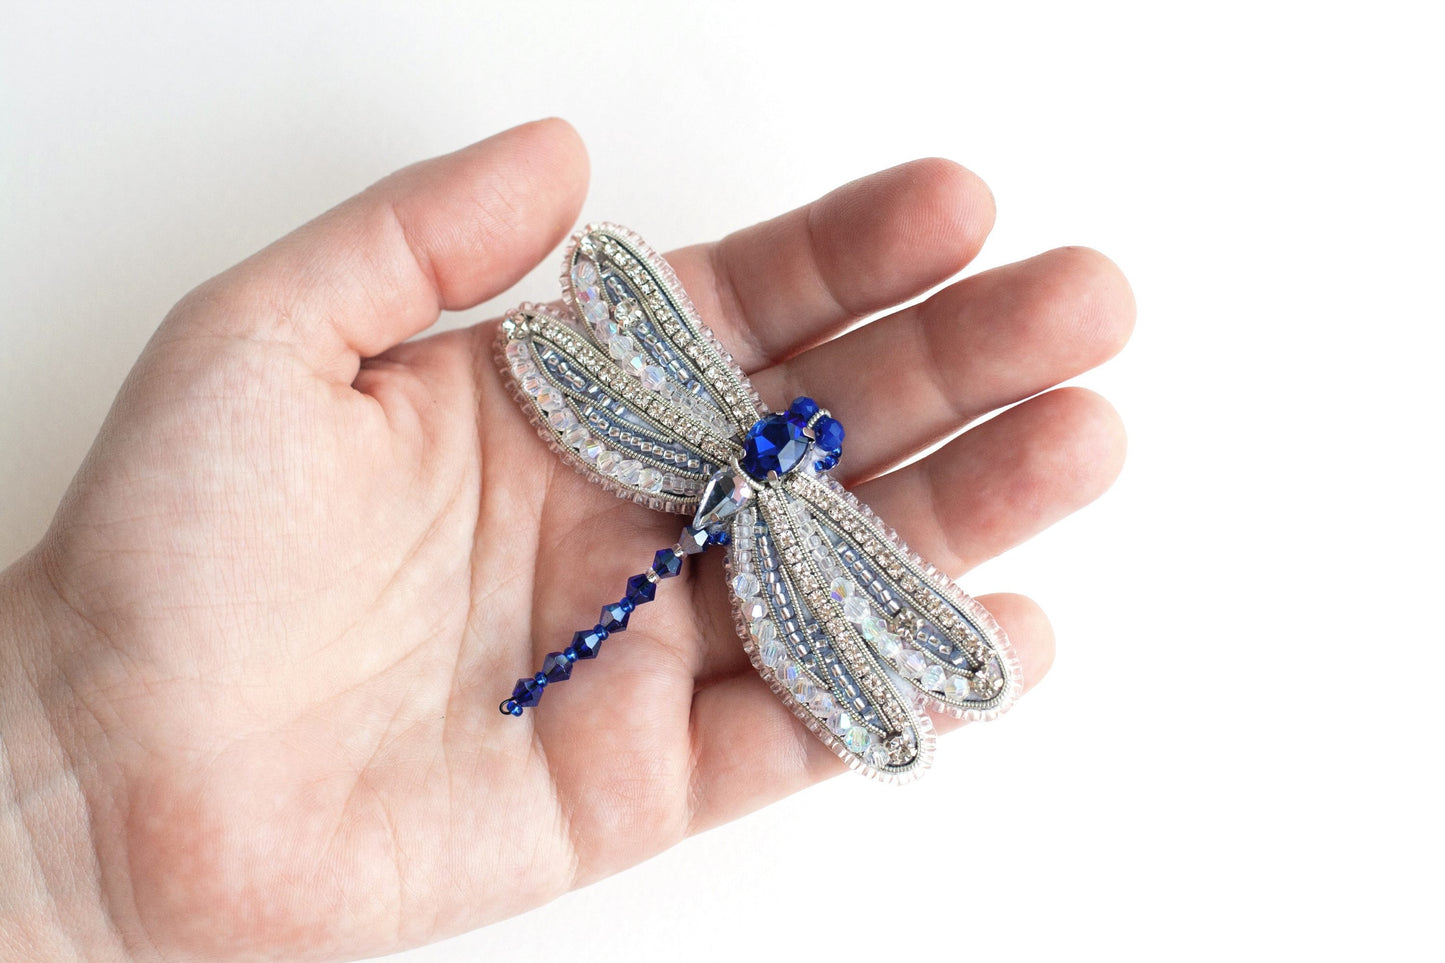 Dragonfly Bead embroidery kit. Seed Bead Brooch kit. DIY Craft kit. Be –  Seller-Online Craft